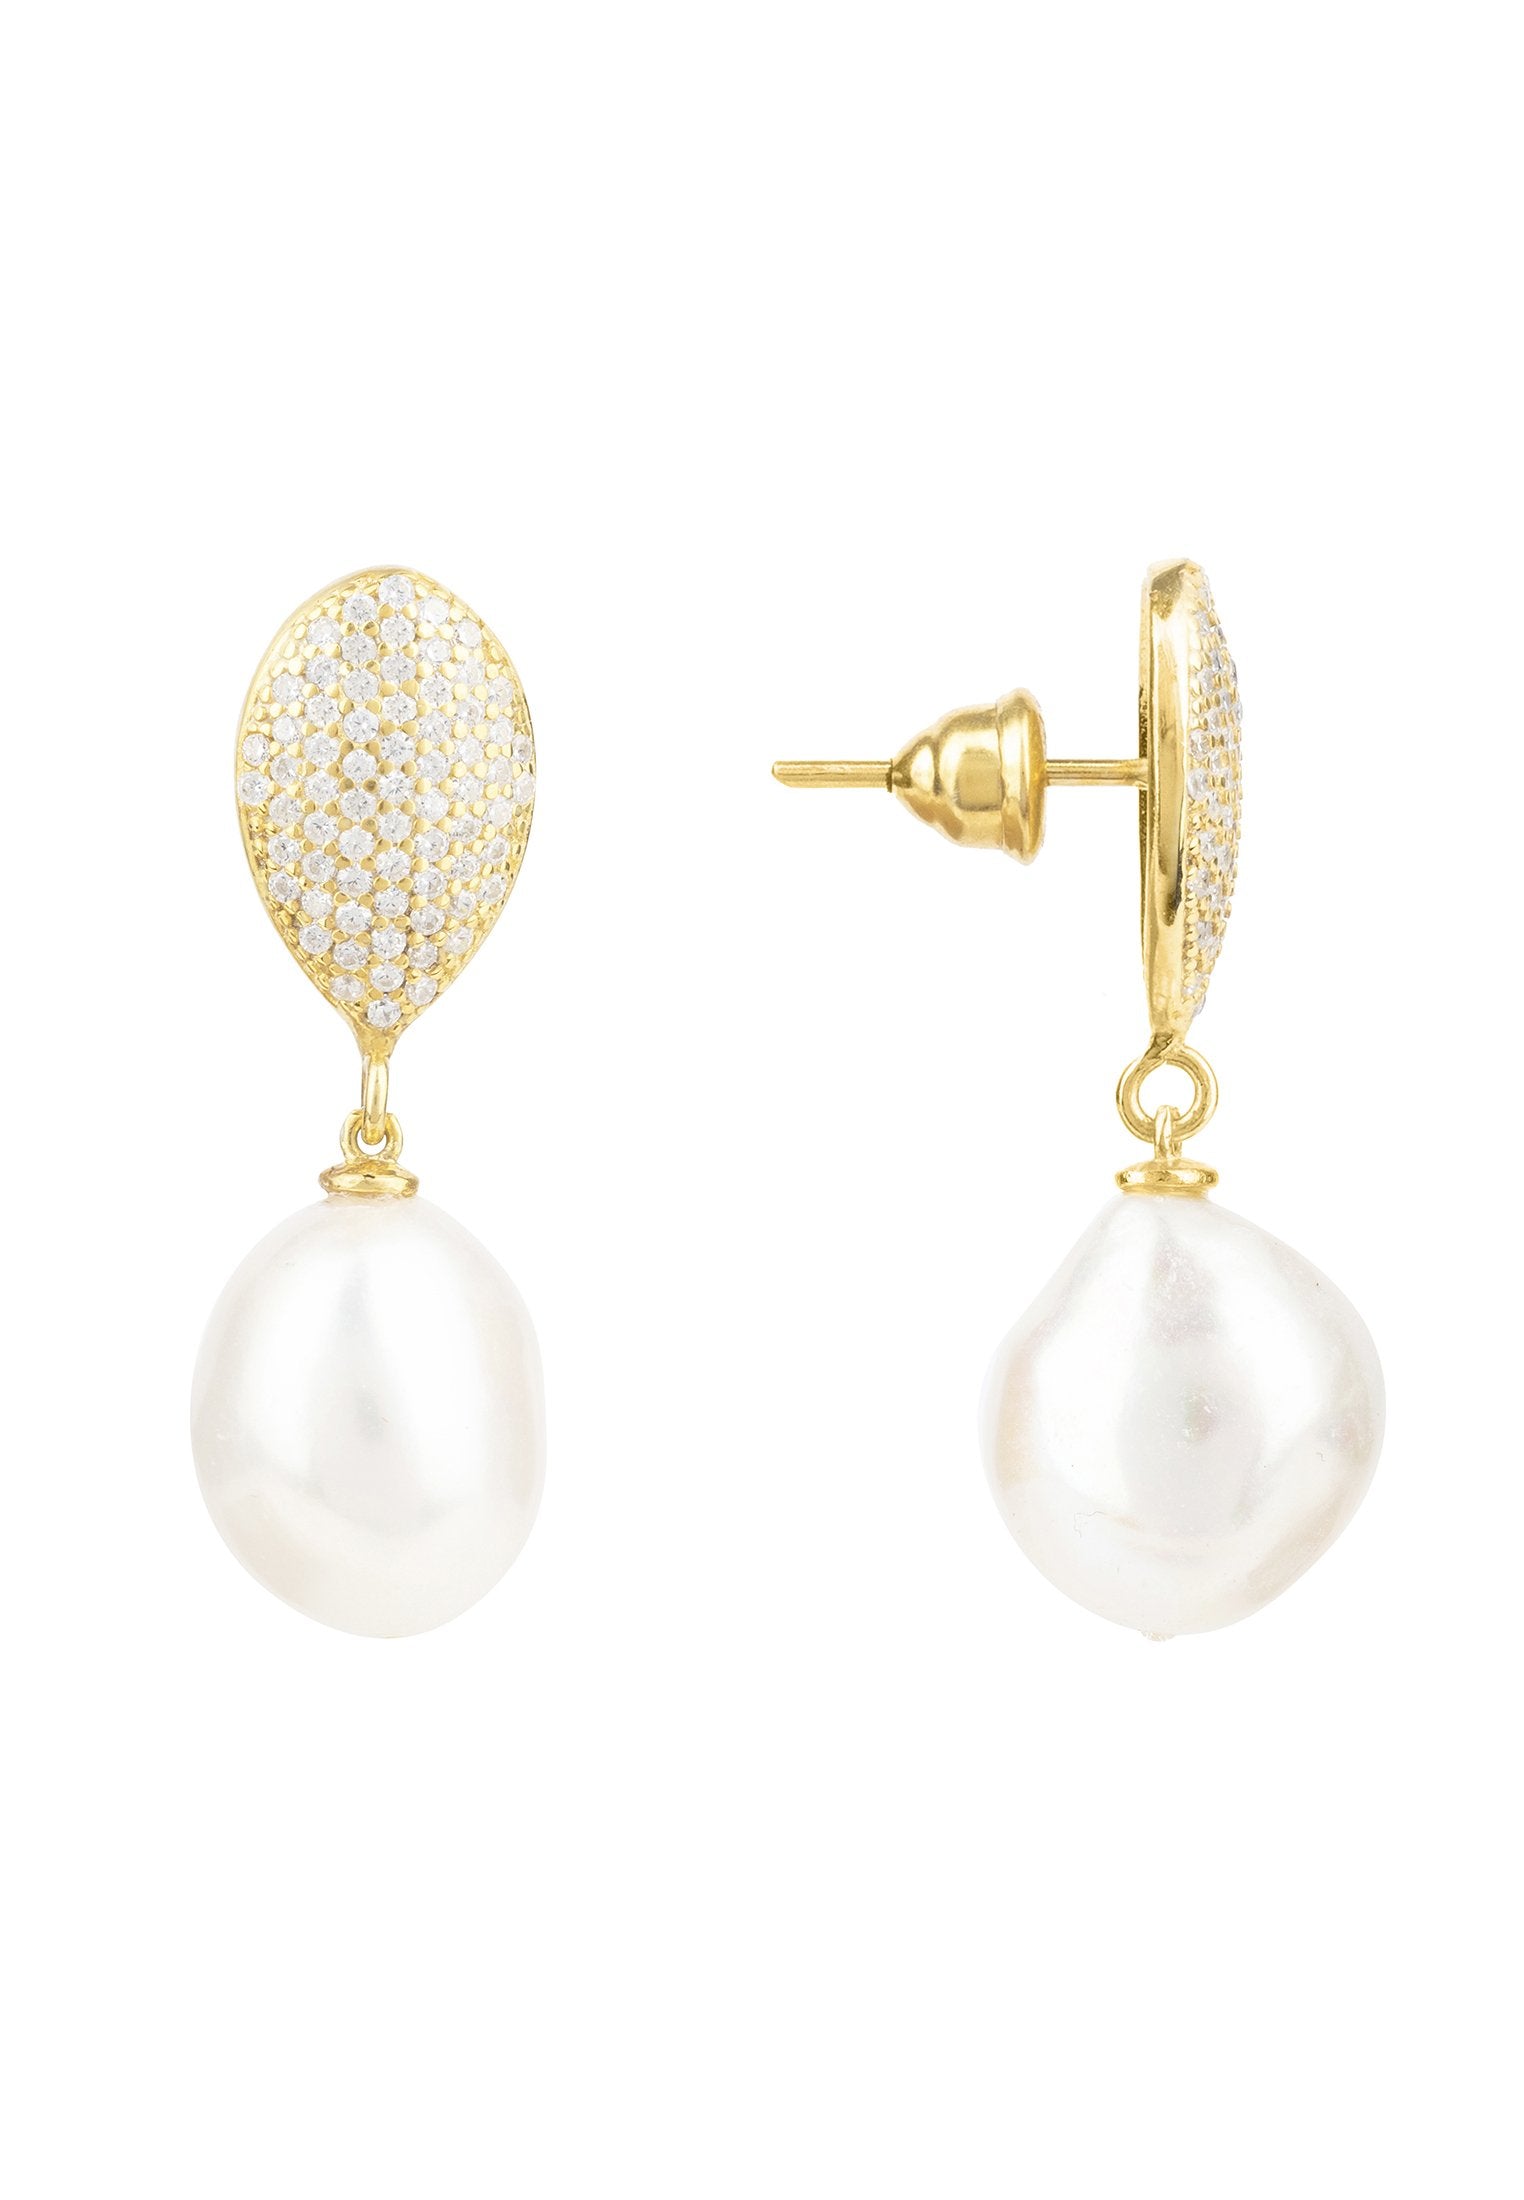 Sophisticated Baroque Pearl Drop Earrings in Gold Finish - Handcrafted with Sterling Silver for Timeless Style - Jewelry & Watches - Bijou Her -  -  - 